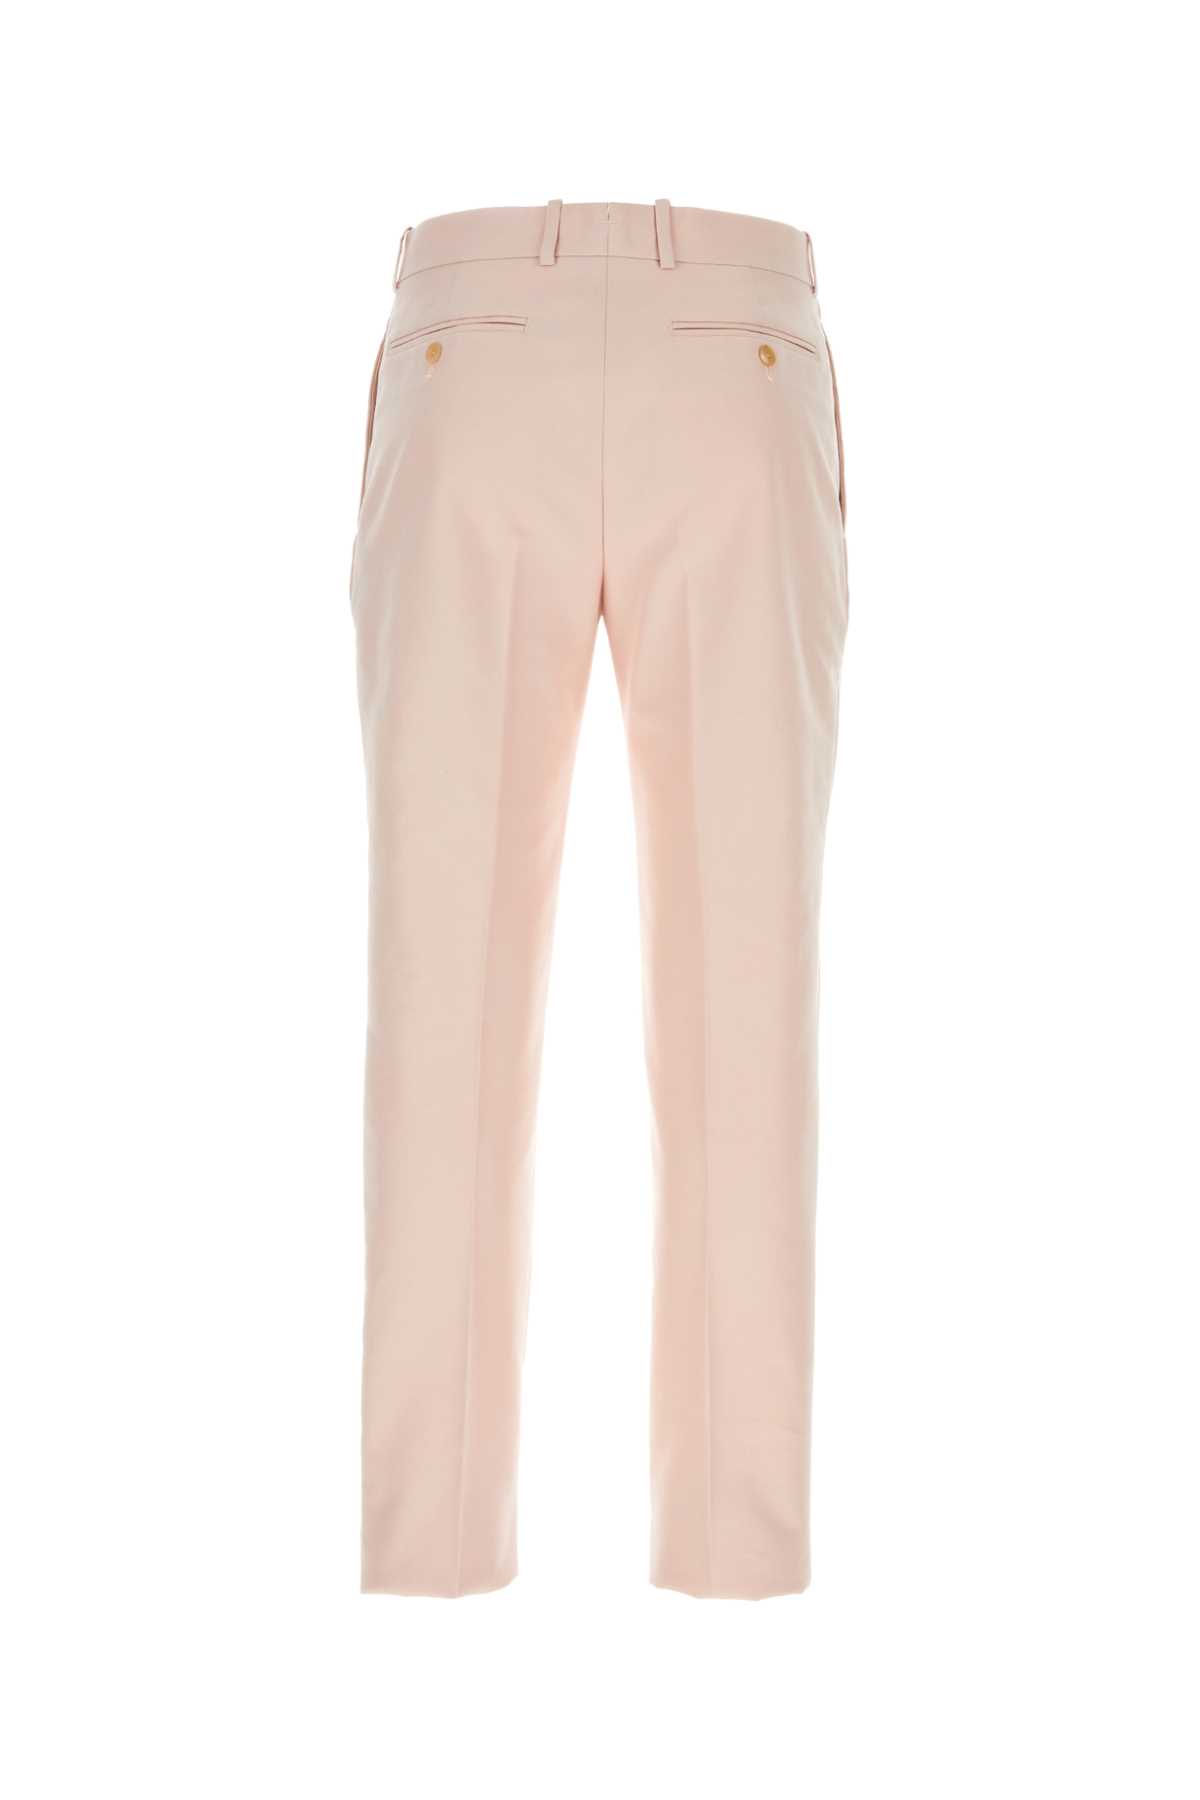 Alexander Mcqueen Pastel Pink Twill Pant In Blossom